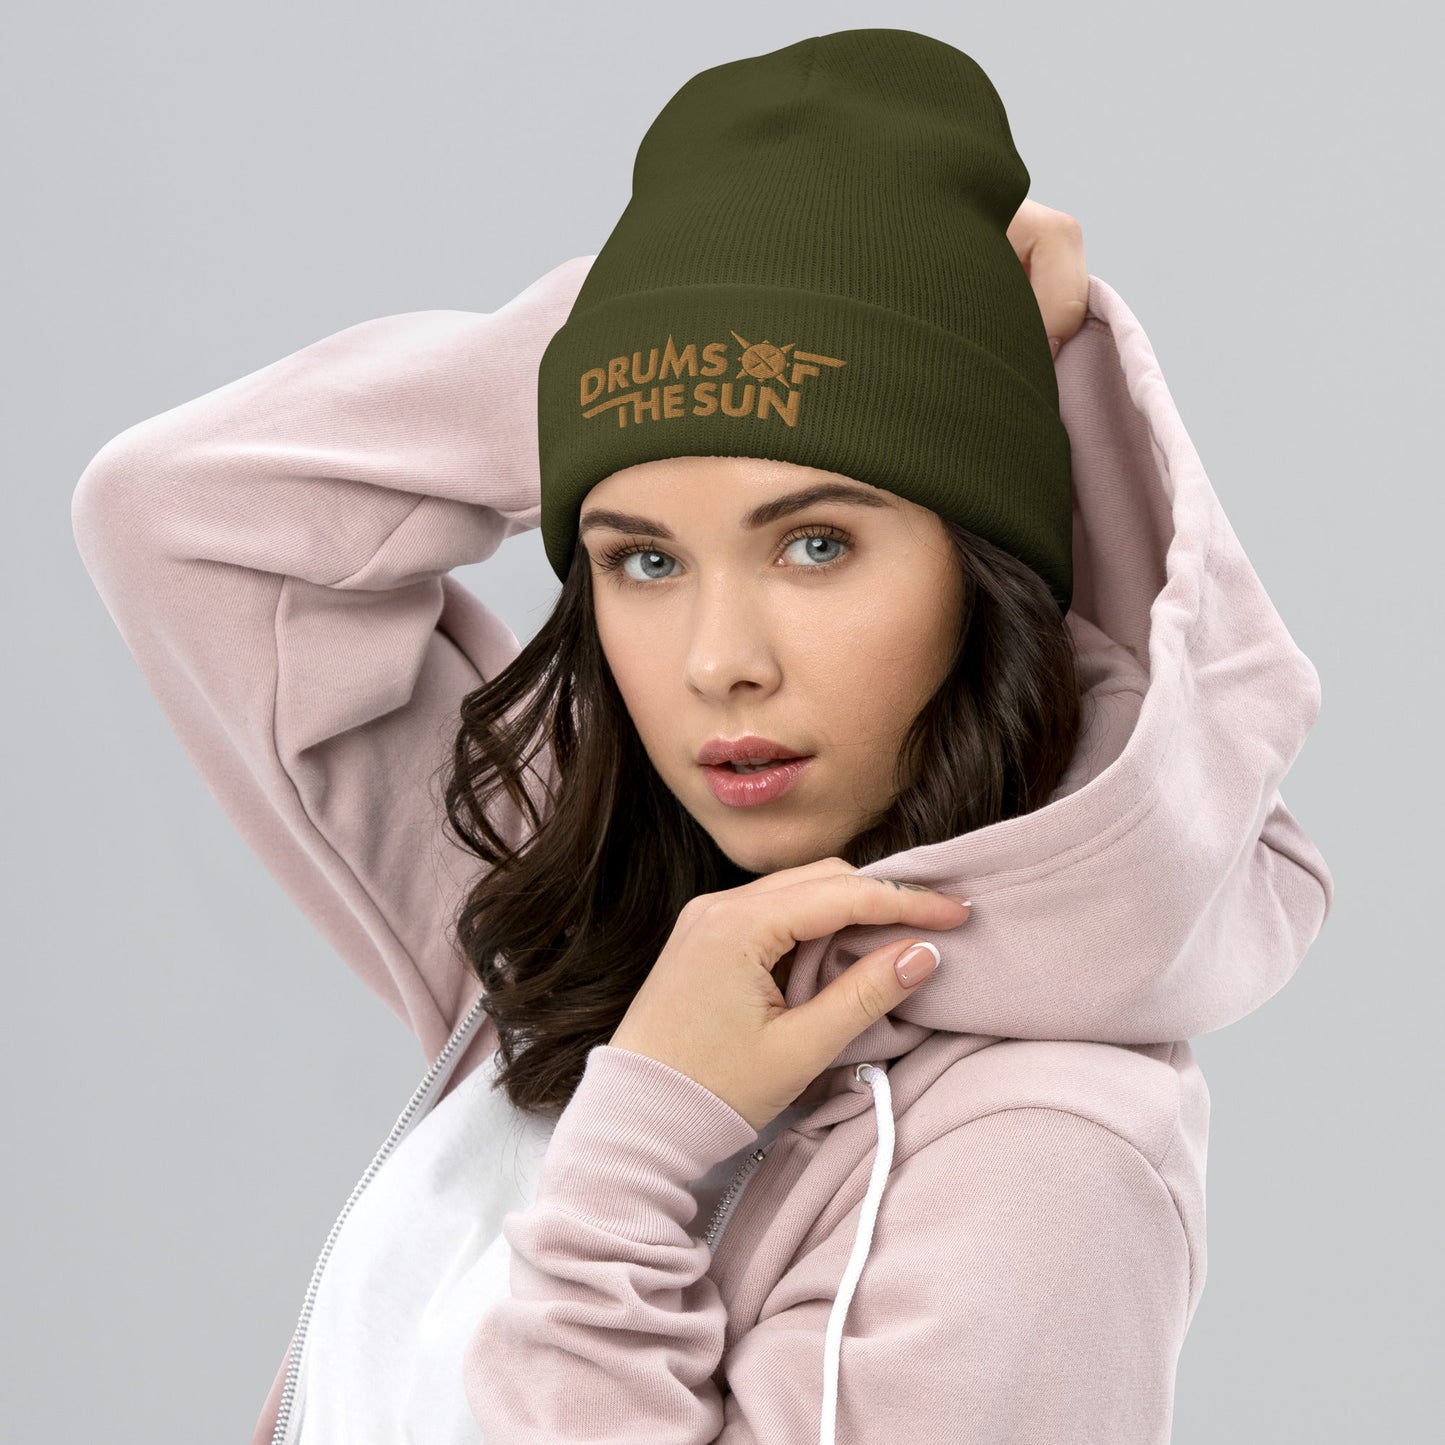 Drums of the Sun Cuffed Beanie - BeExtra! Apparel & More